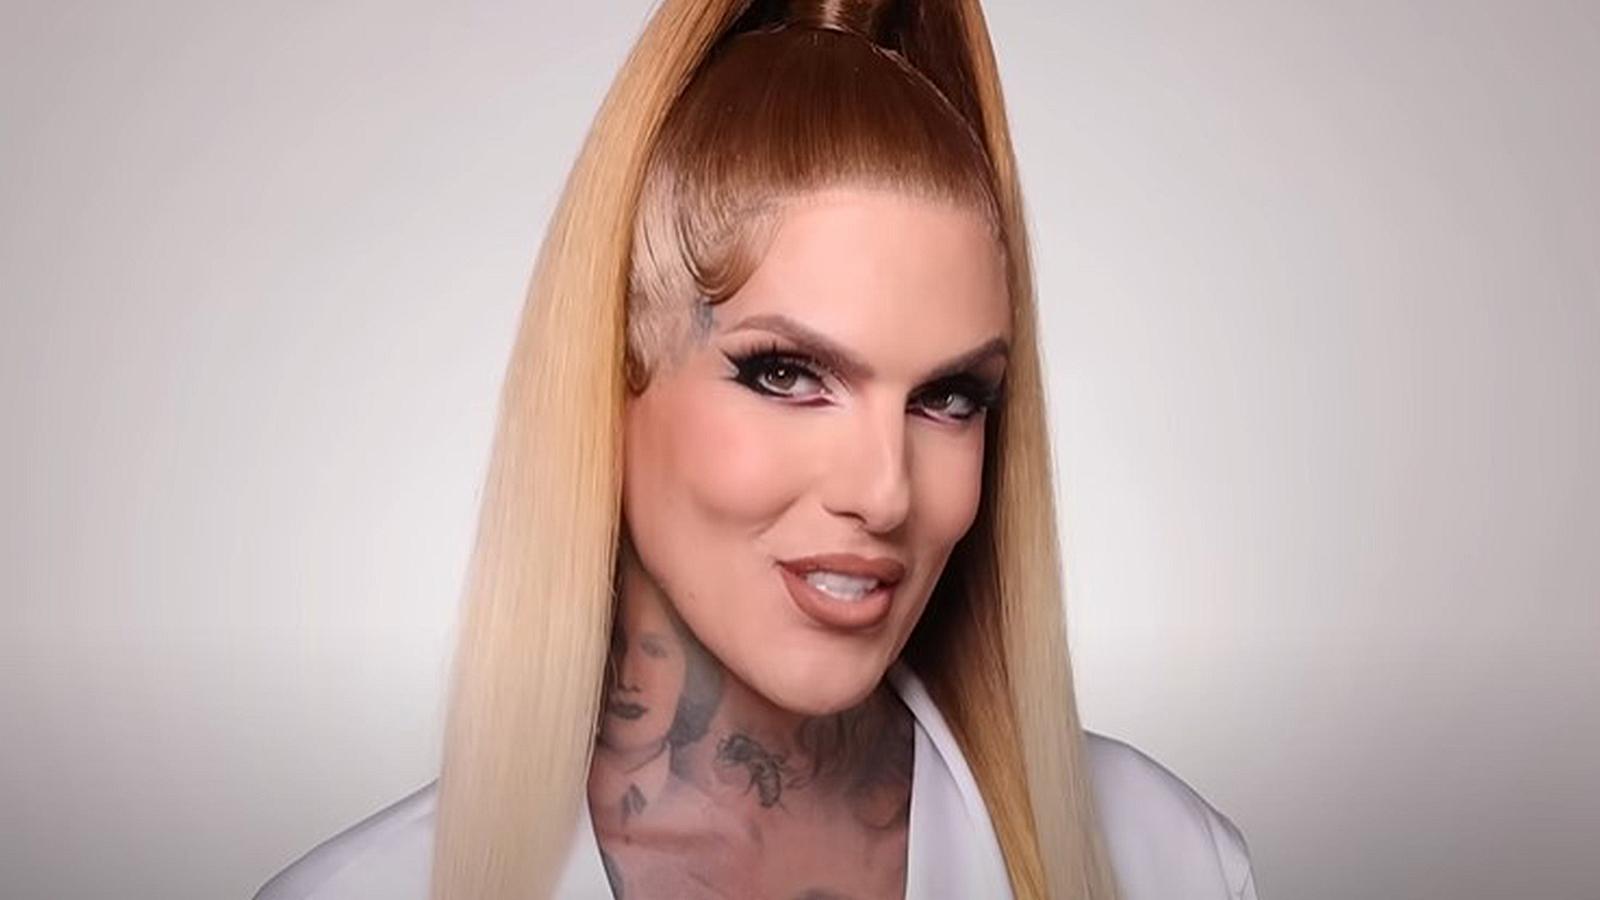 Jeffree Star is opening a store in Wyoming to sell 'makeup and